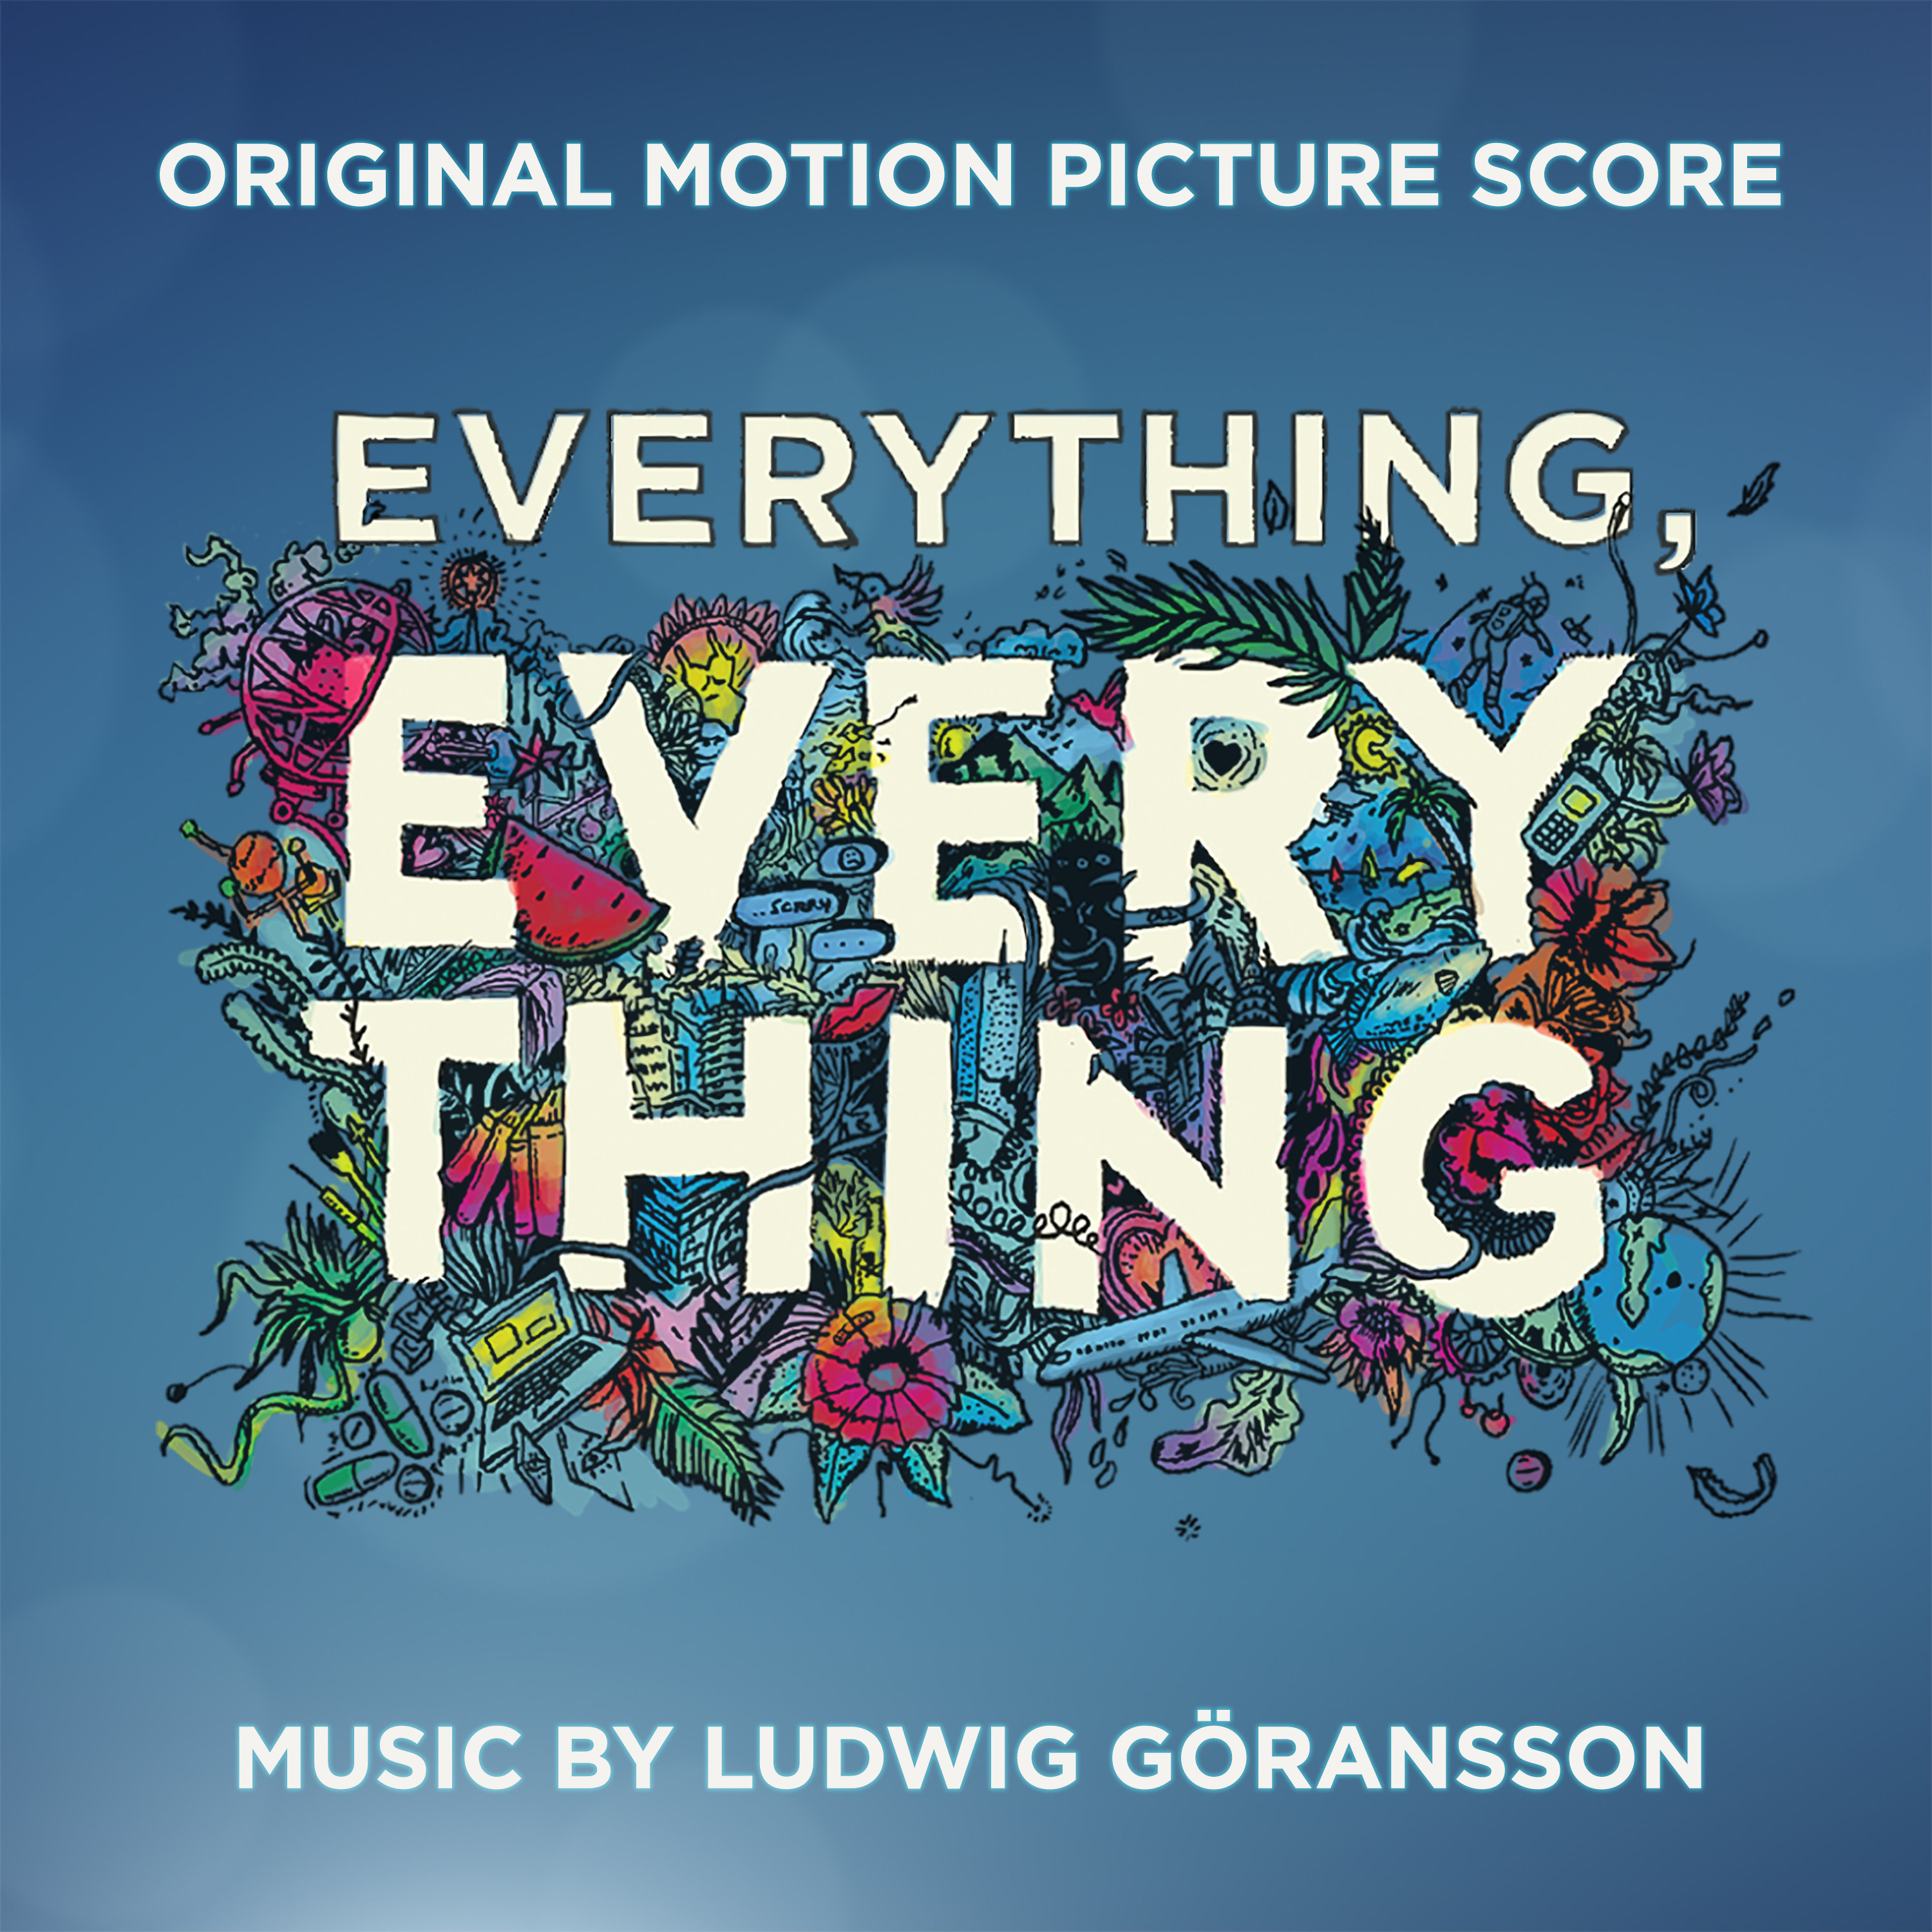 Everything everything live. Everything. Everything обложка. Everything, everything. Everything everything book.